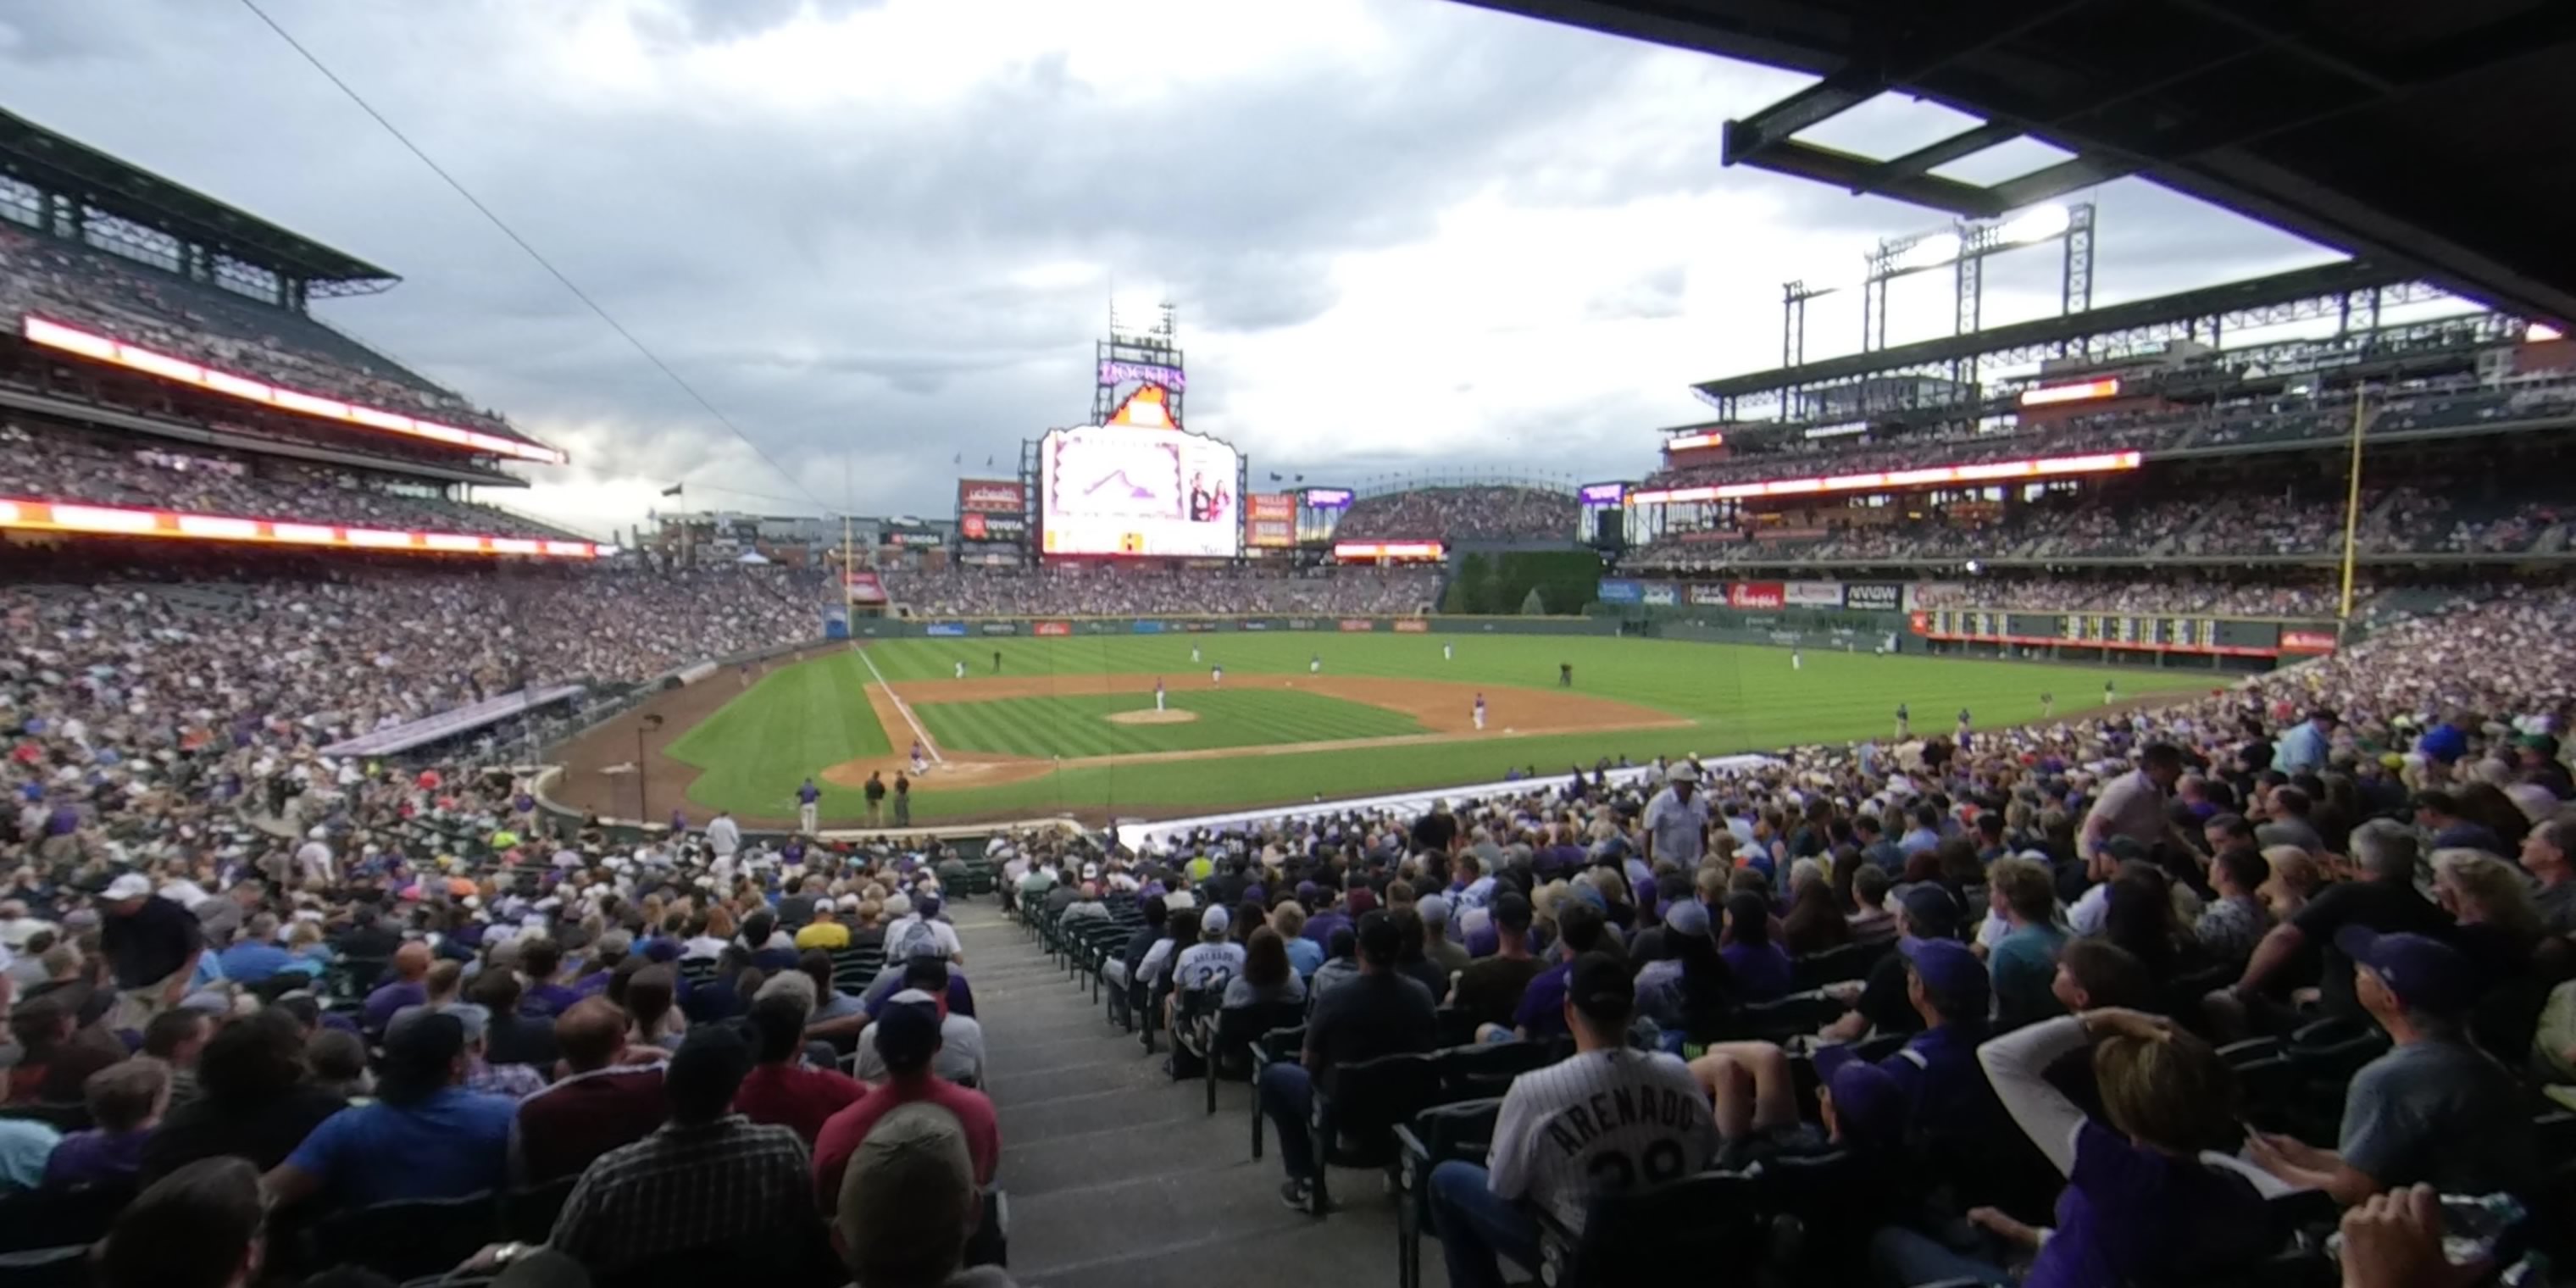 Section 126 at Coors Field 